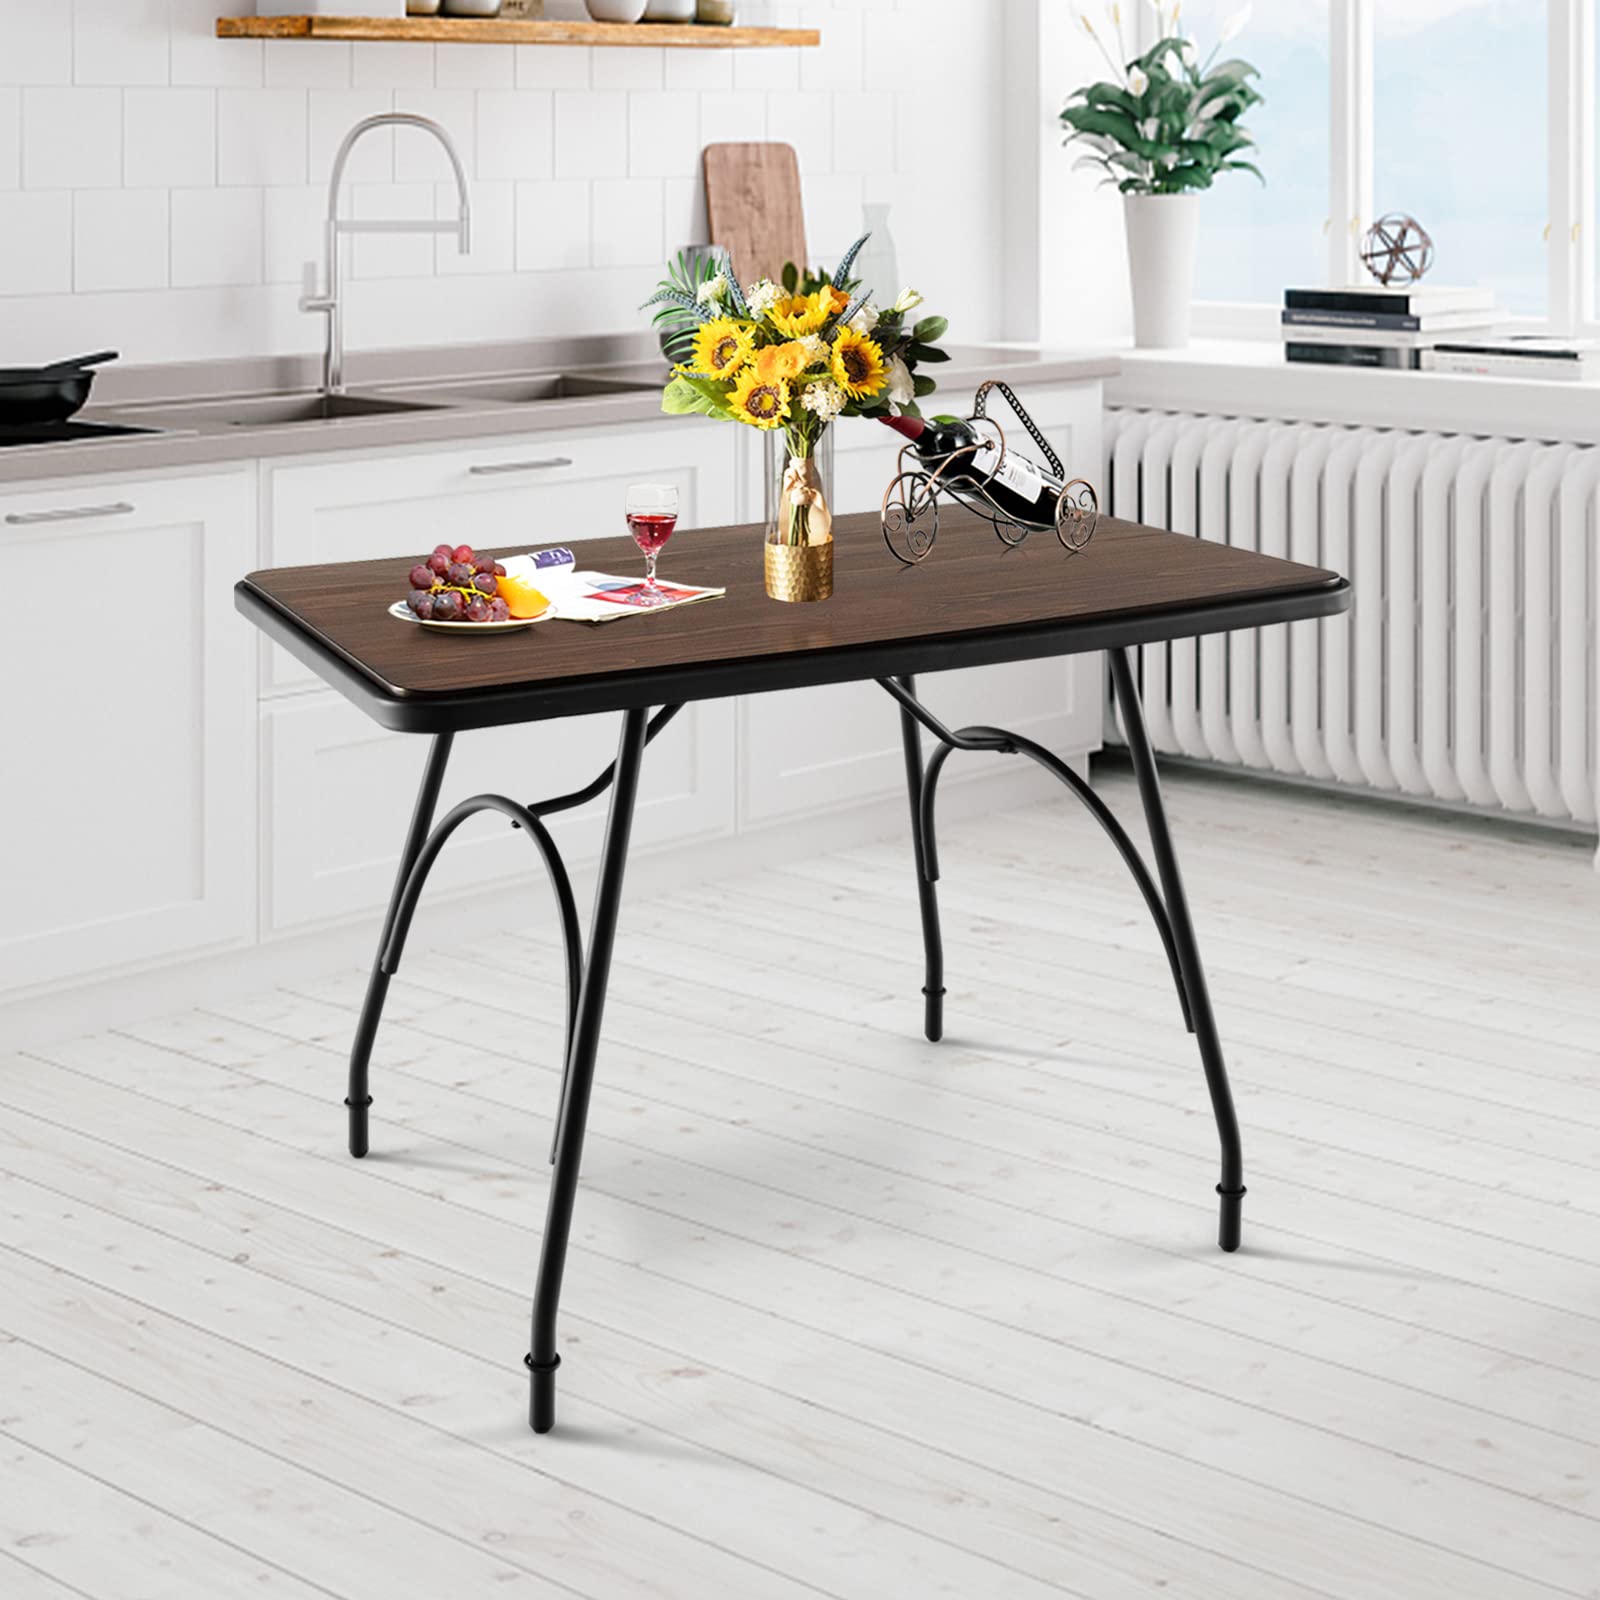 Giantex Rectangular Dining Table - Industrial Kitchen Table